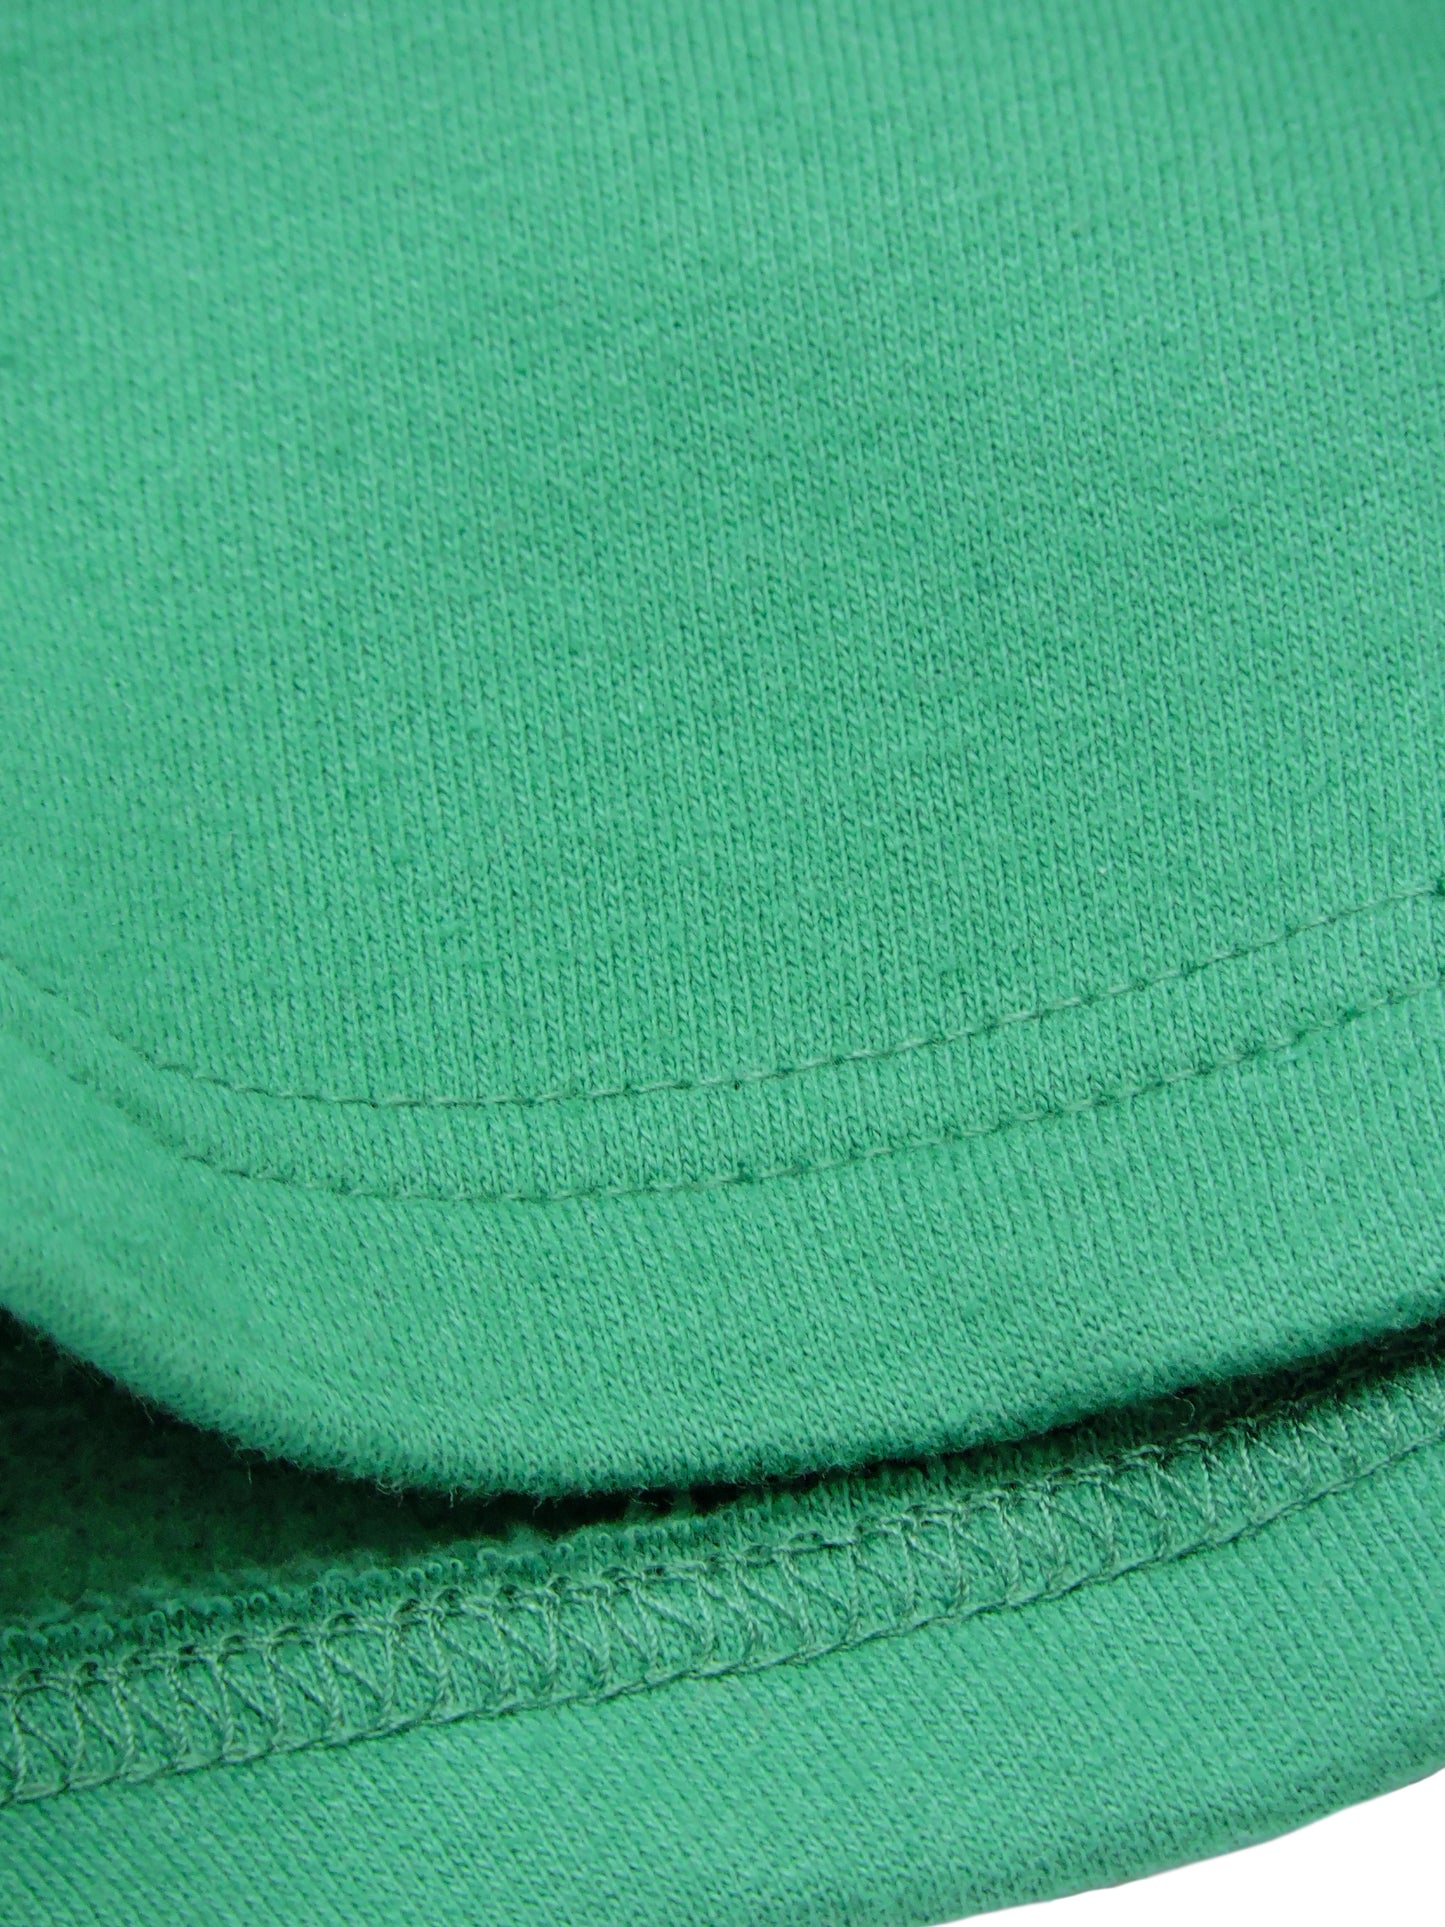 Close up of knitted seams around short opening